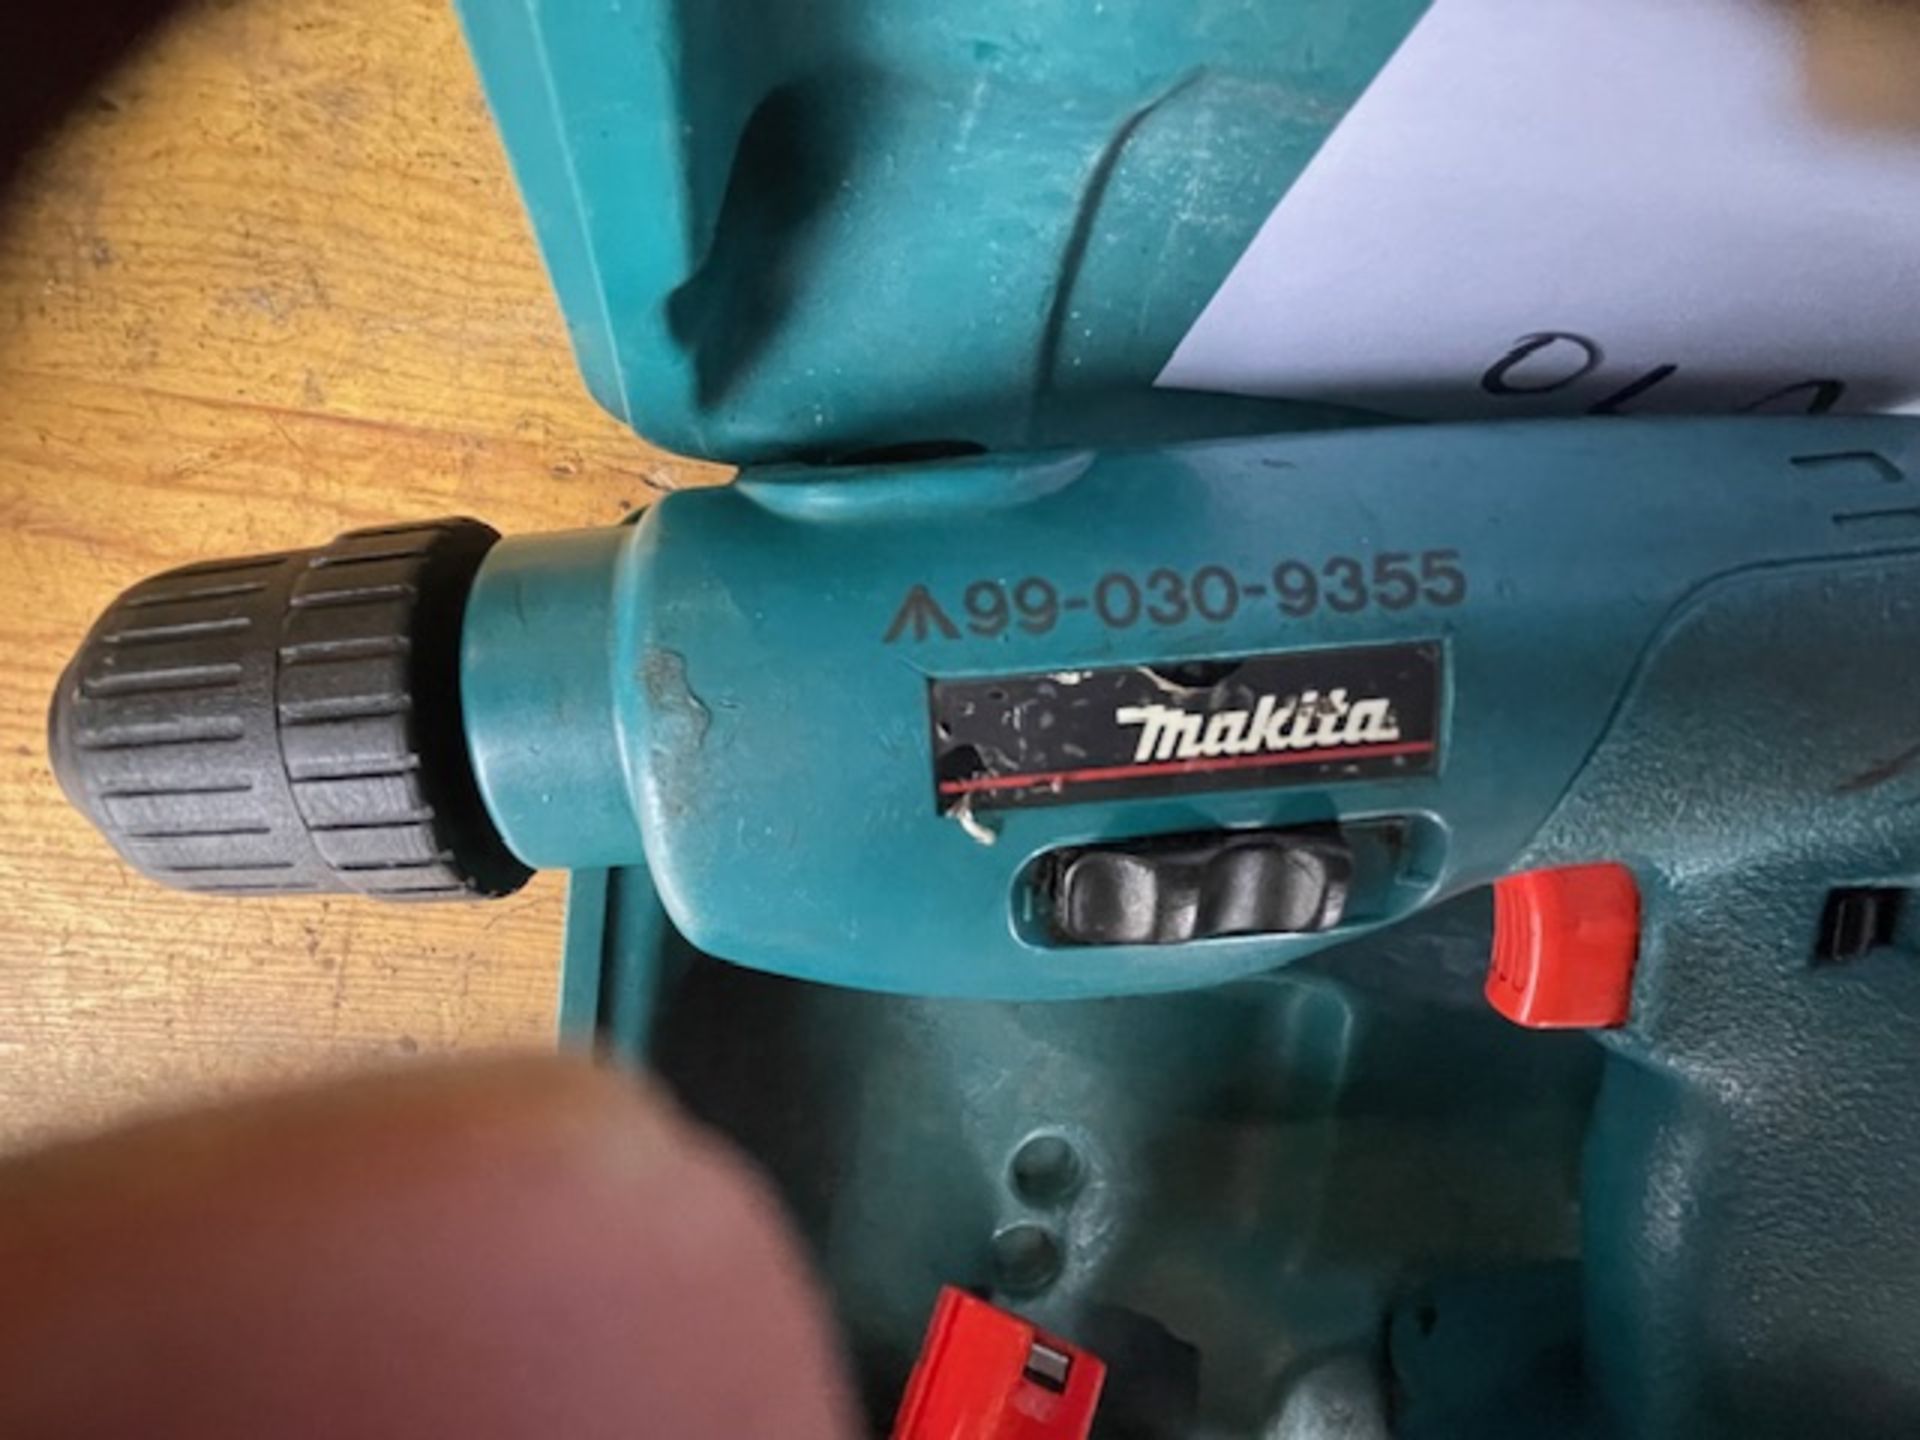 MAKITA 8411D CORDLESS DRILL C/W CHARGER AND BATTERIES IN CASE - Image 3 of 4